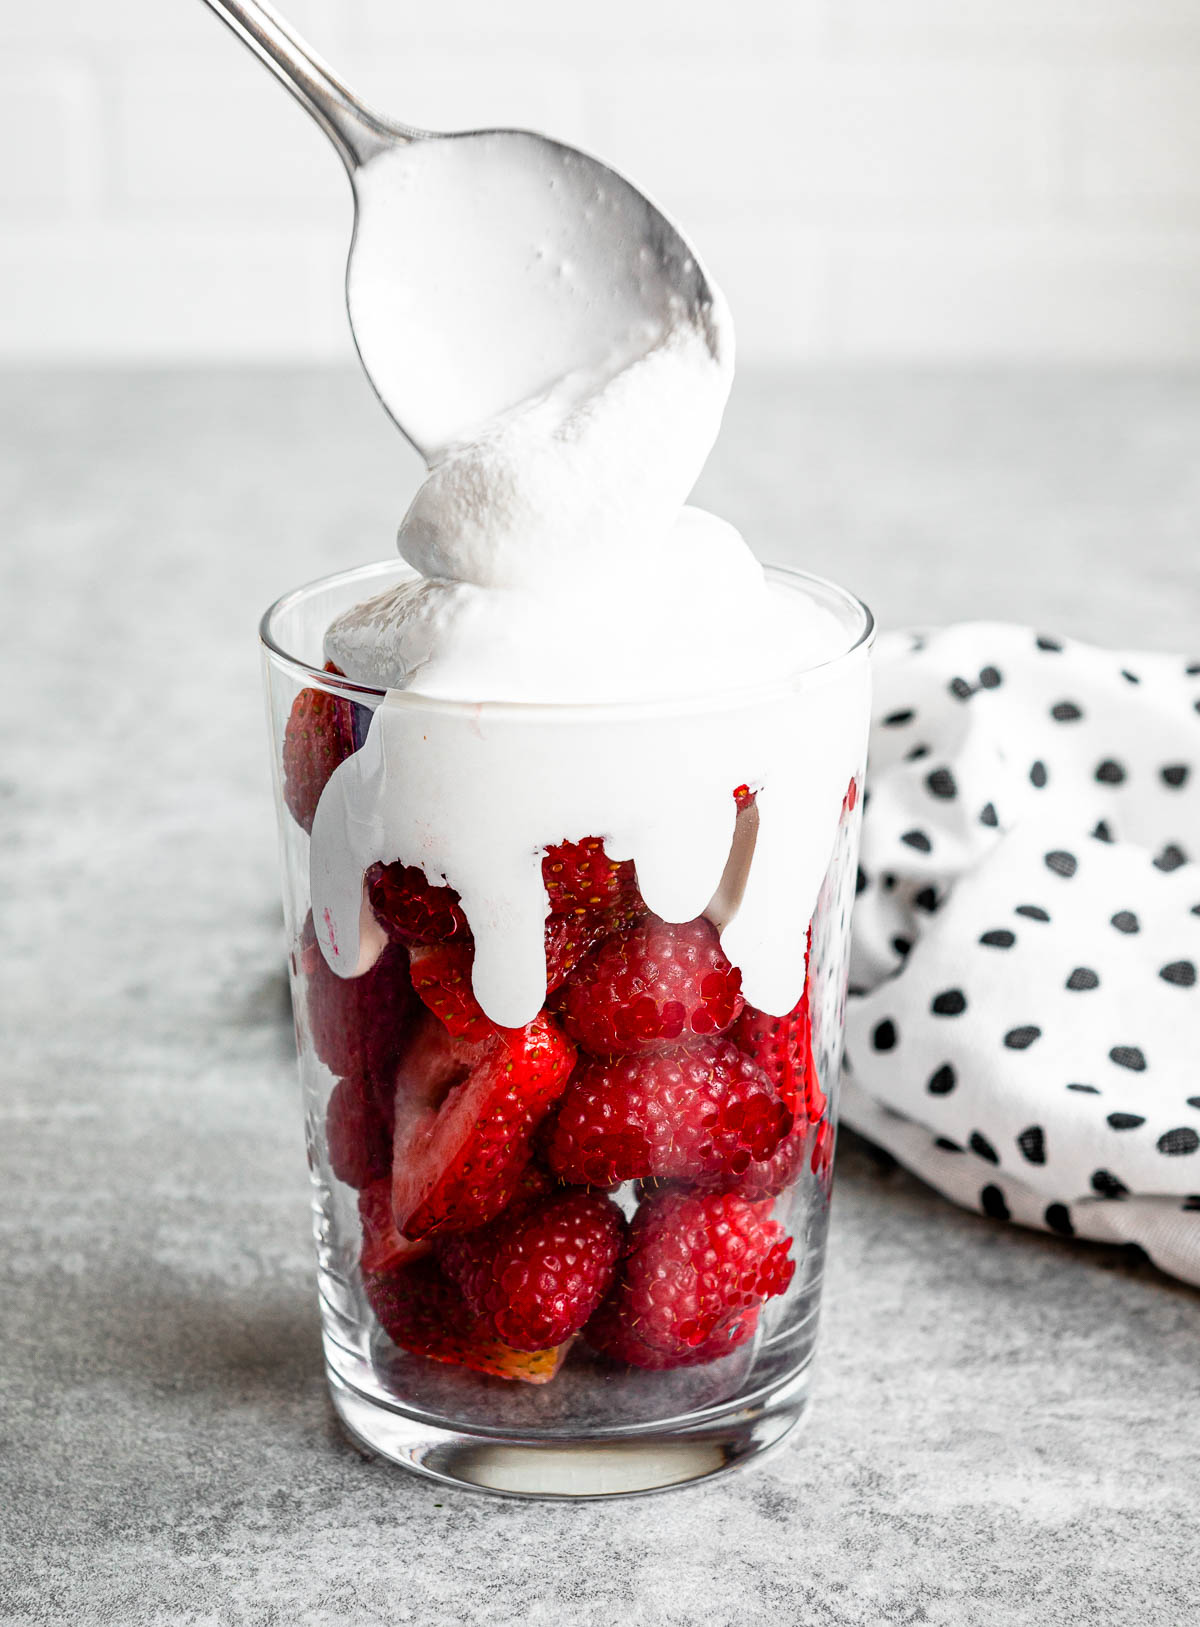 coconut whipped cream getting scooped over top of fresh strawberries in a clear glass.